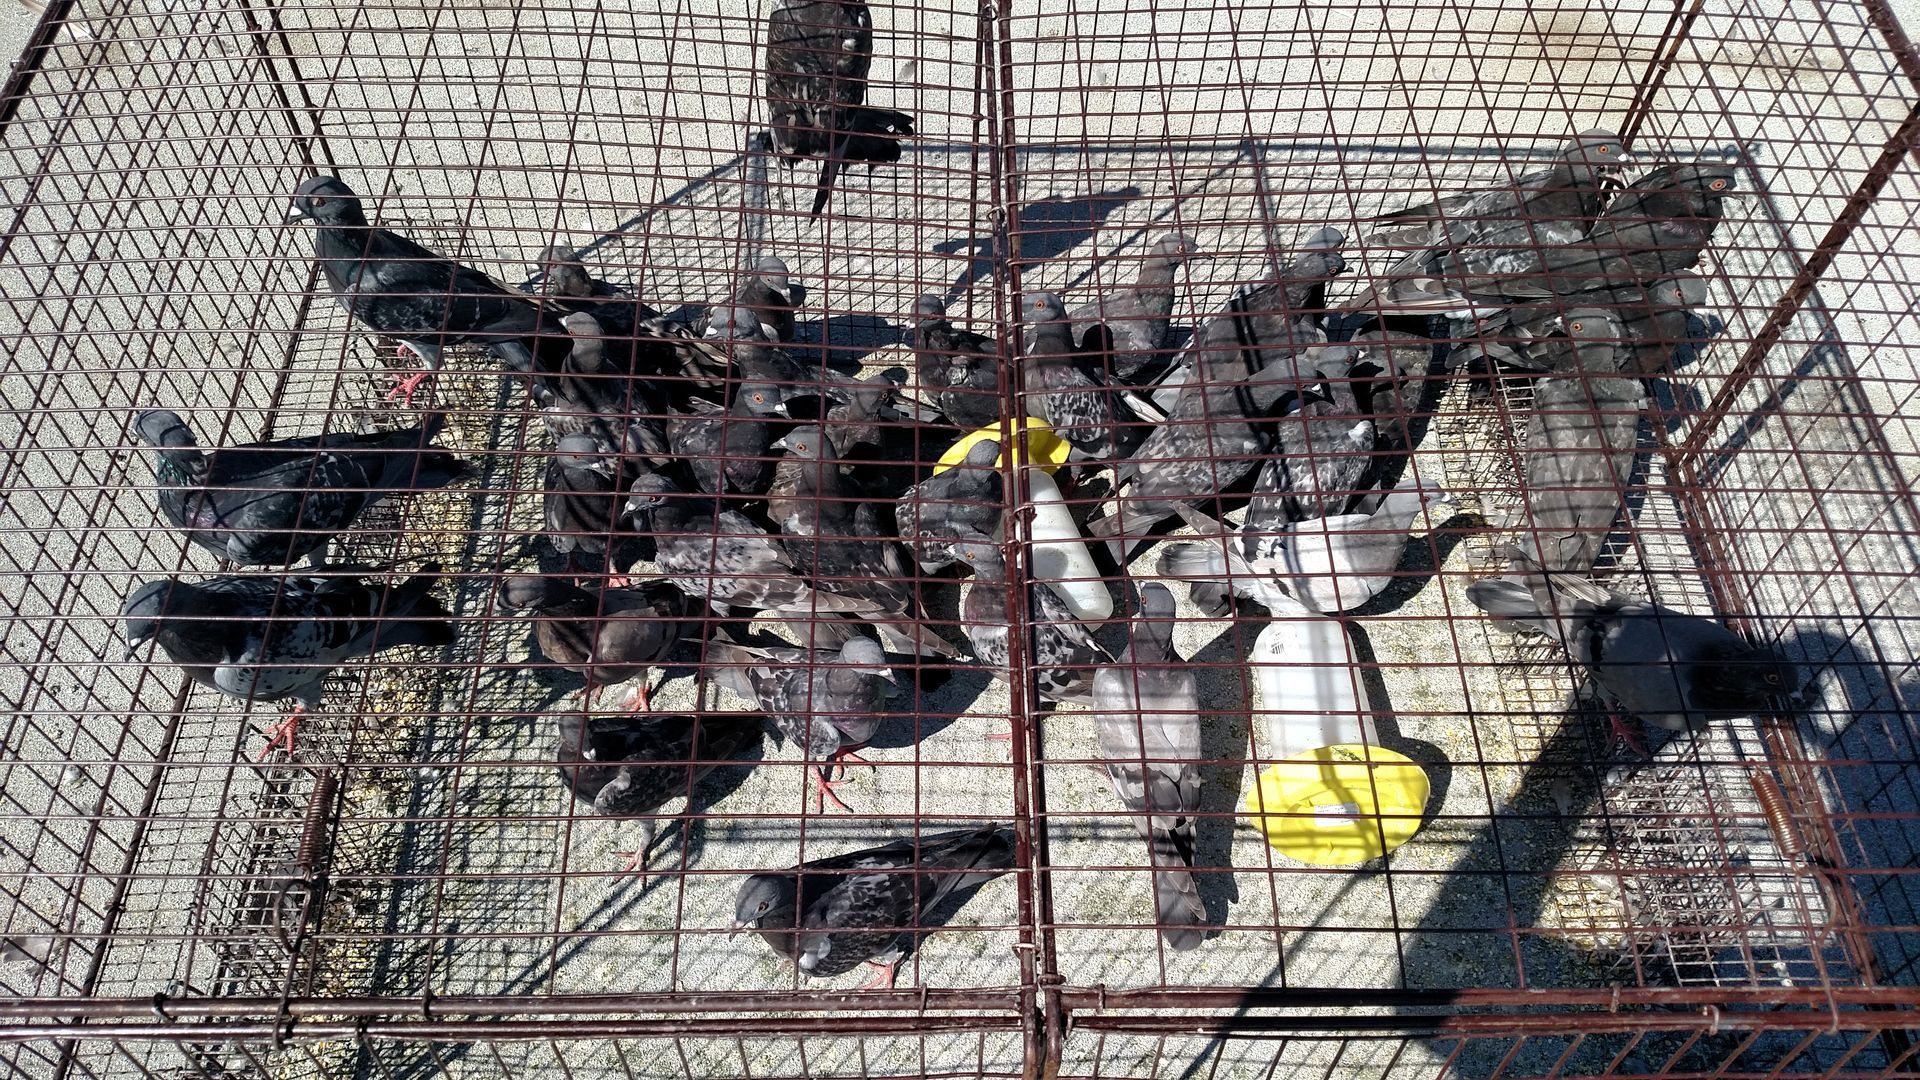 A bunch of pigeons are sitting in a cage.